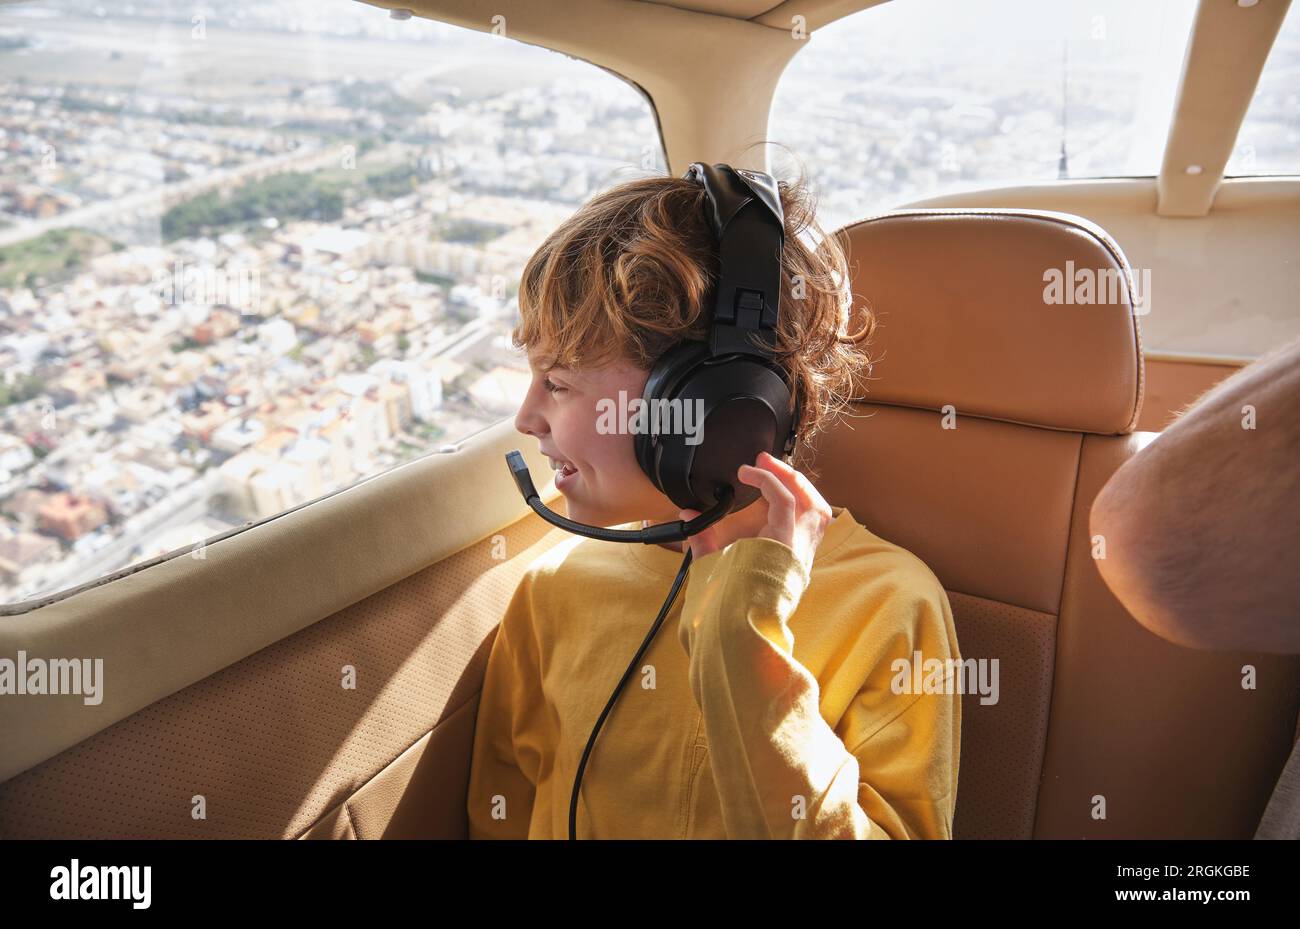 Cheerful boy with curly blond hair in casual clothes and headset smiling while sitting on passenger seat of modern small aircraft and admiring citysca Stock Photo